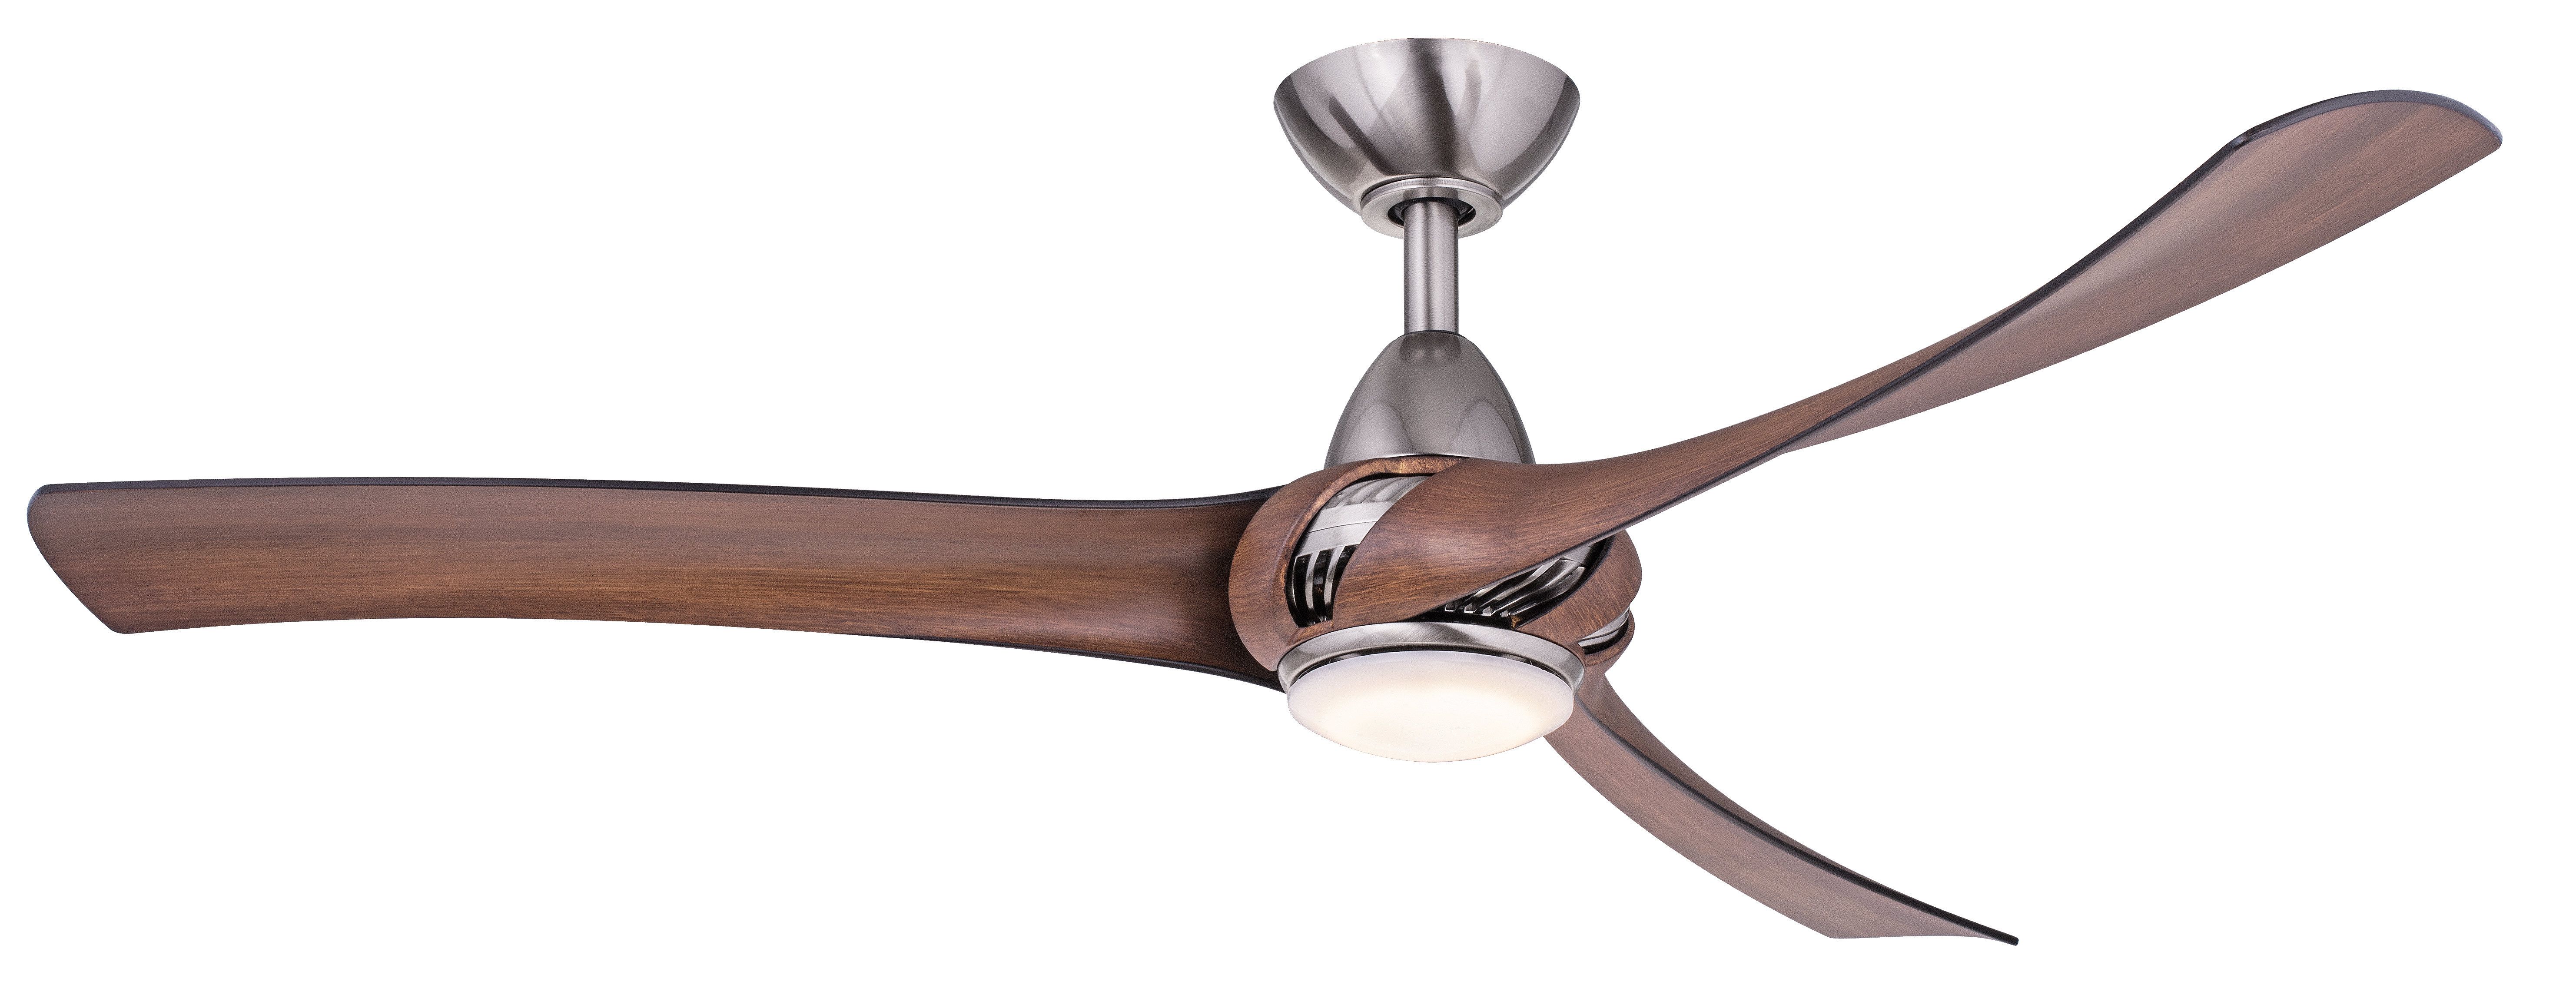 Trendy Three Posts Cairo 52" 3 Blade Led Ceiling Fan With Remote In Hemsworth 4 Blade Ceiling Fans (View 17 of 20)